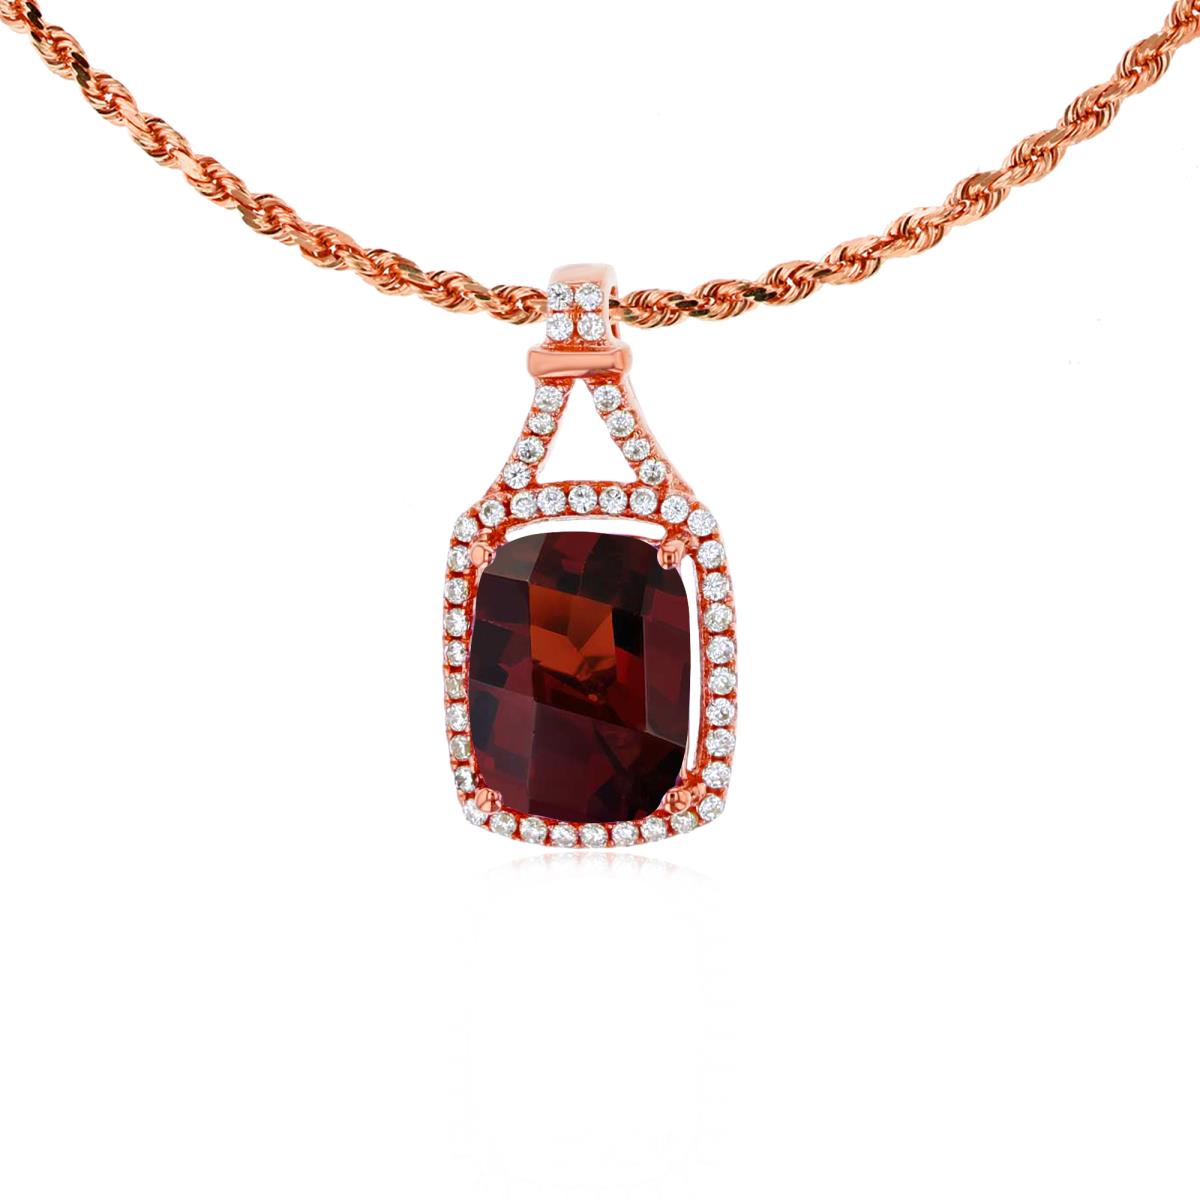 10K Rose Gold 8x6mm Cushion Garnet & 0.13 CTTW Rd Diamonds Halo 18" Rope Chain Necklace